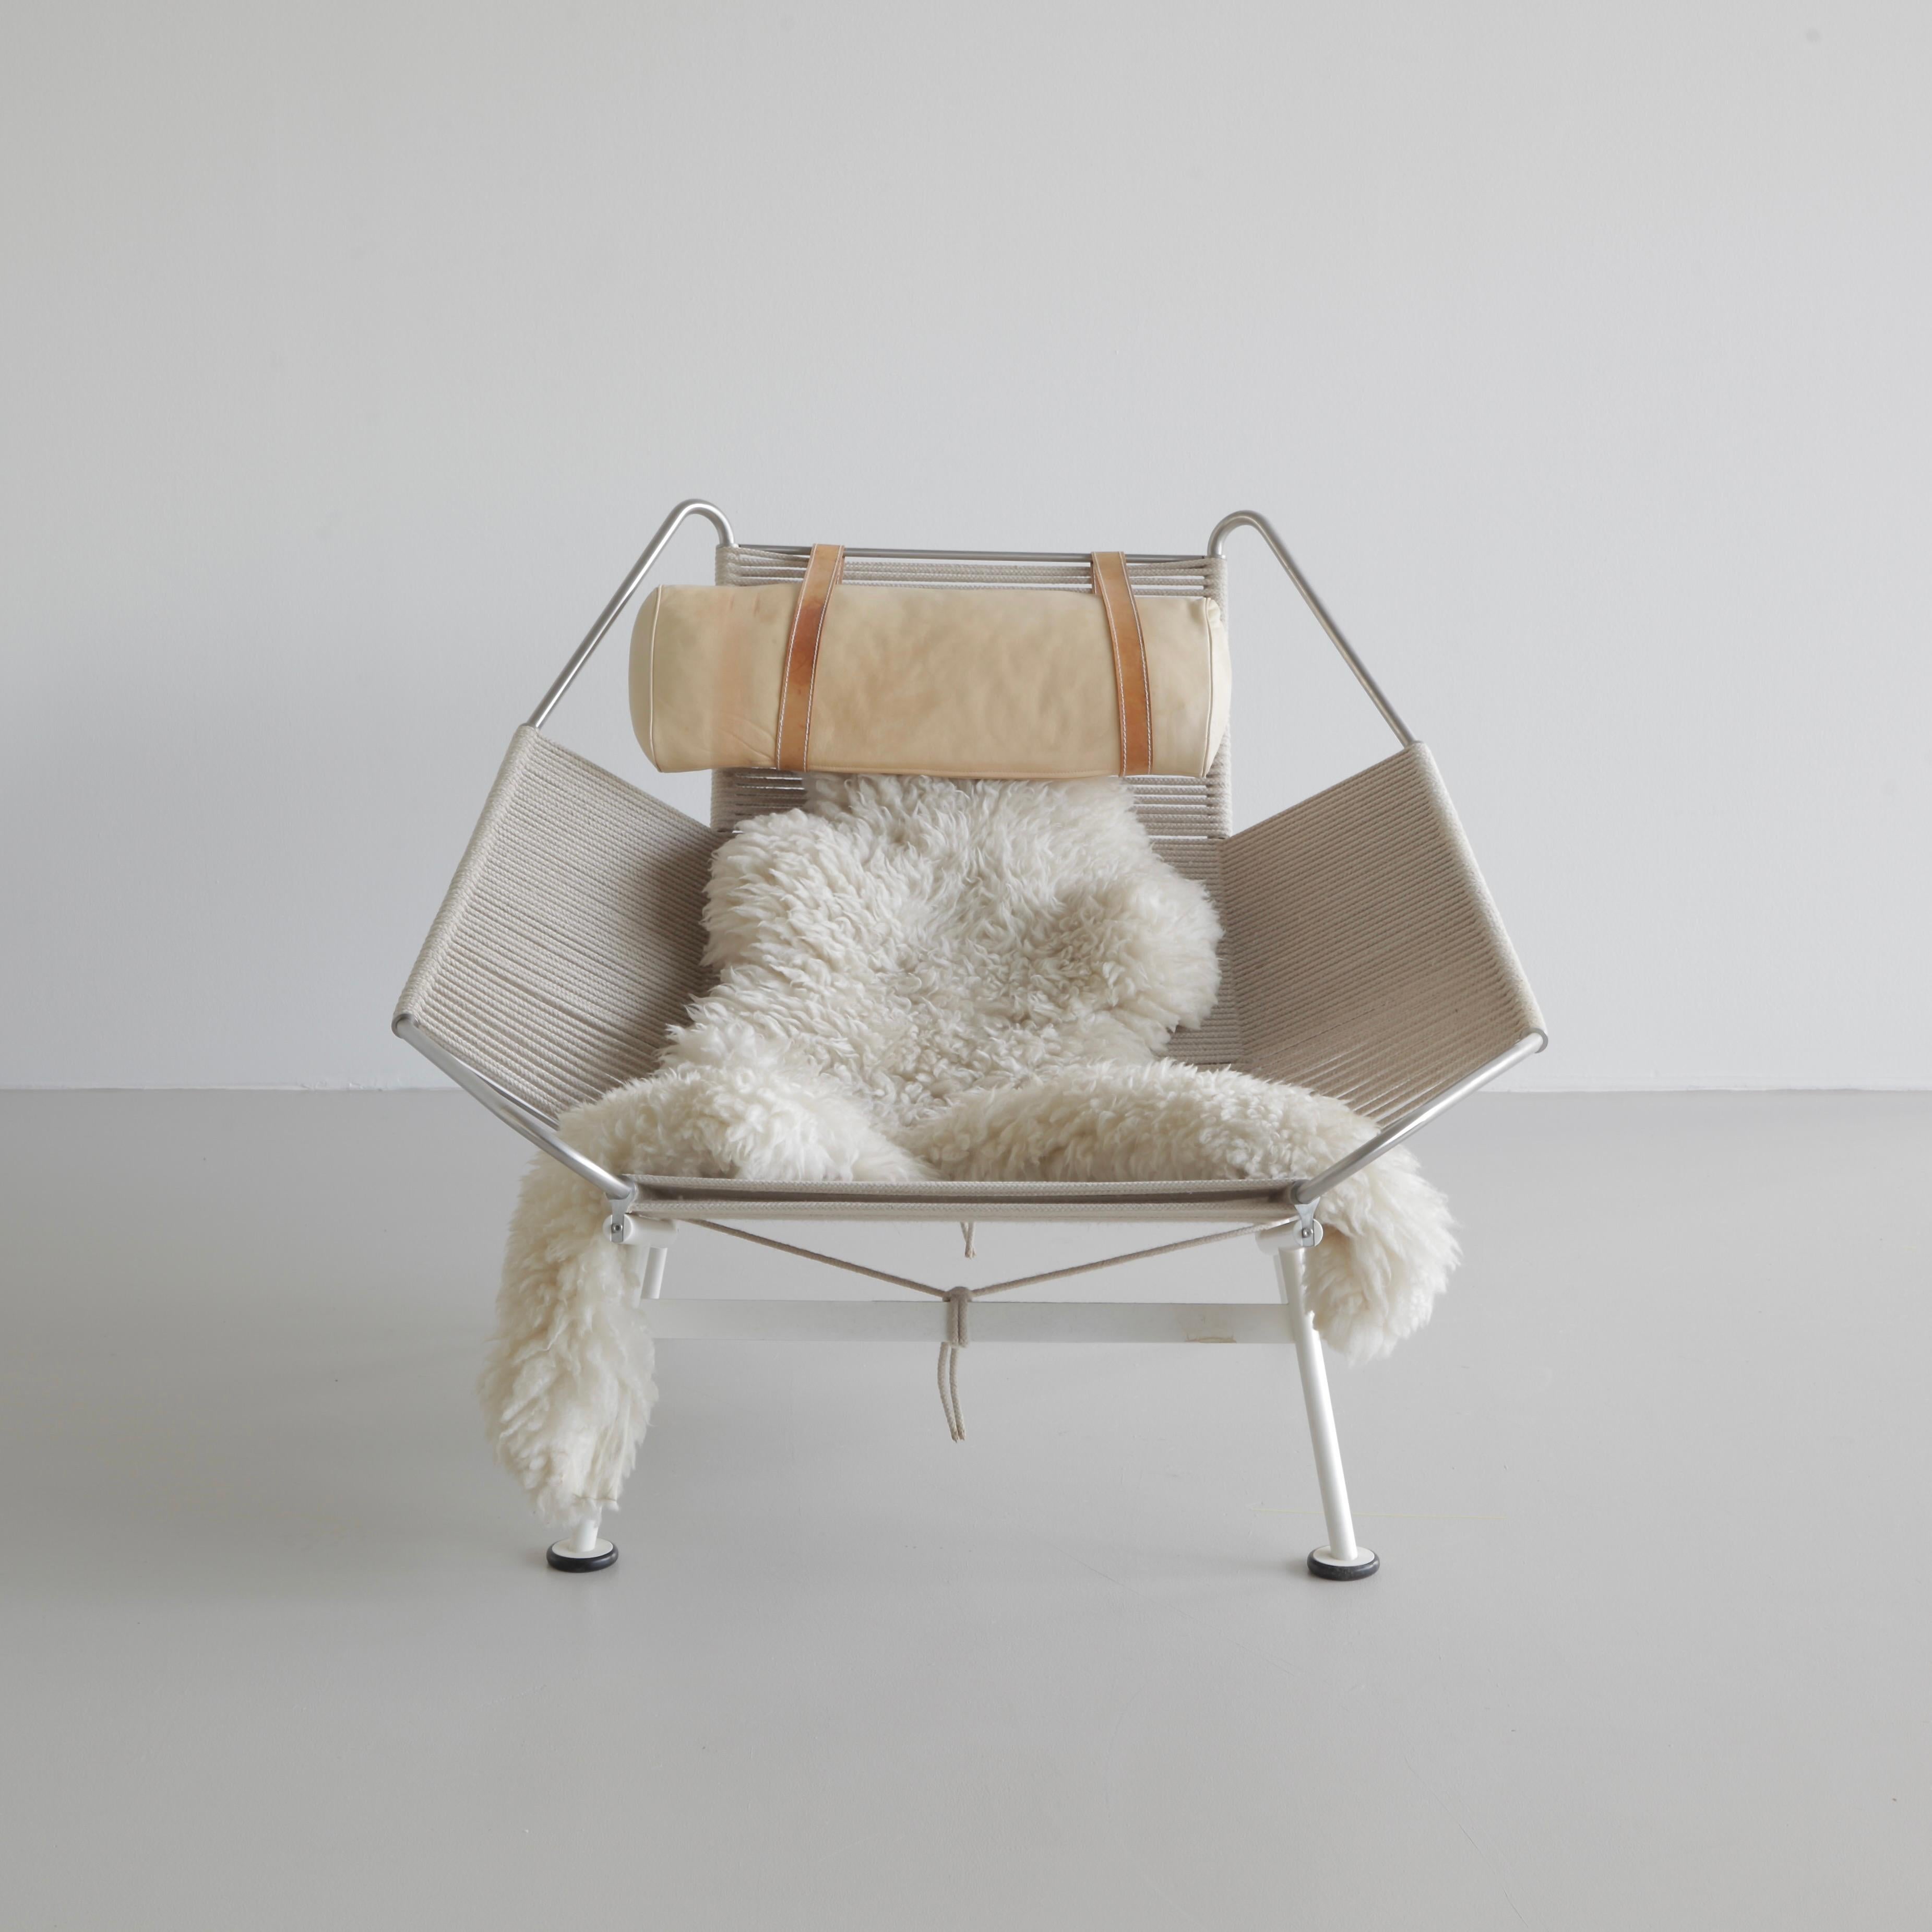 Vintage lounge chair designed by Hans J. Wegner. Denmark, PP Mobler, 1950.

The PP225 lounge chair, white stainless steel frame with one single natural halyard flag covered with a longhaired sheepskin. The flag line is made of natural linen woven